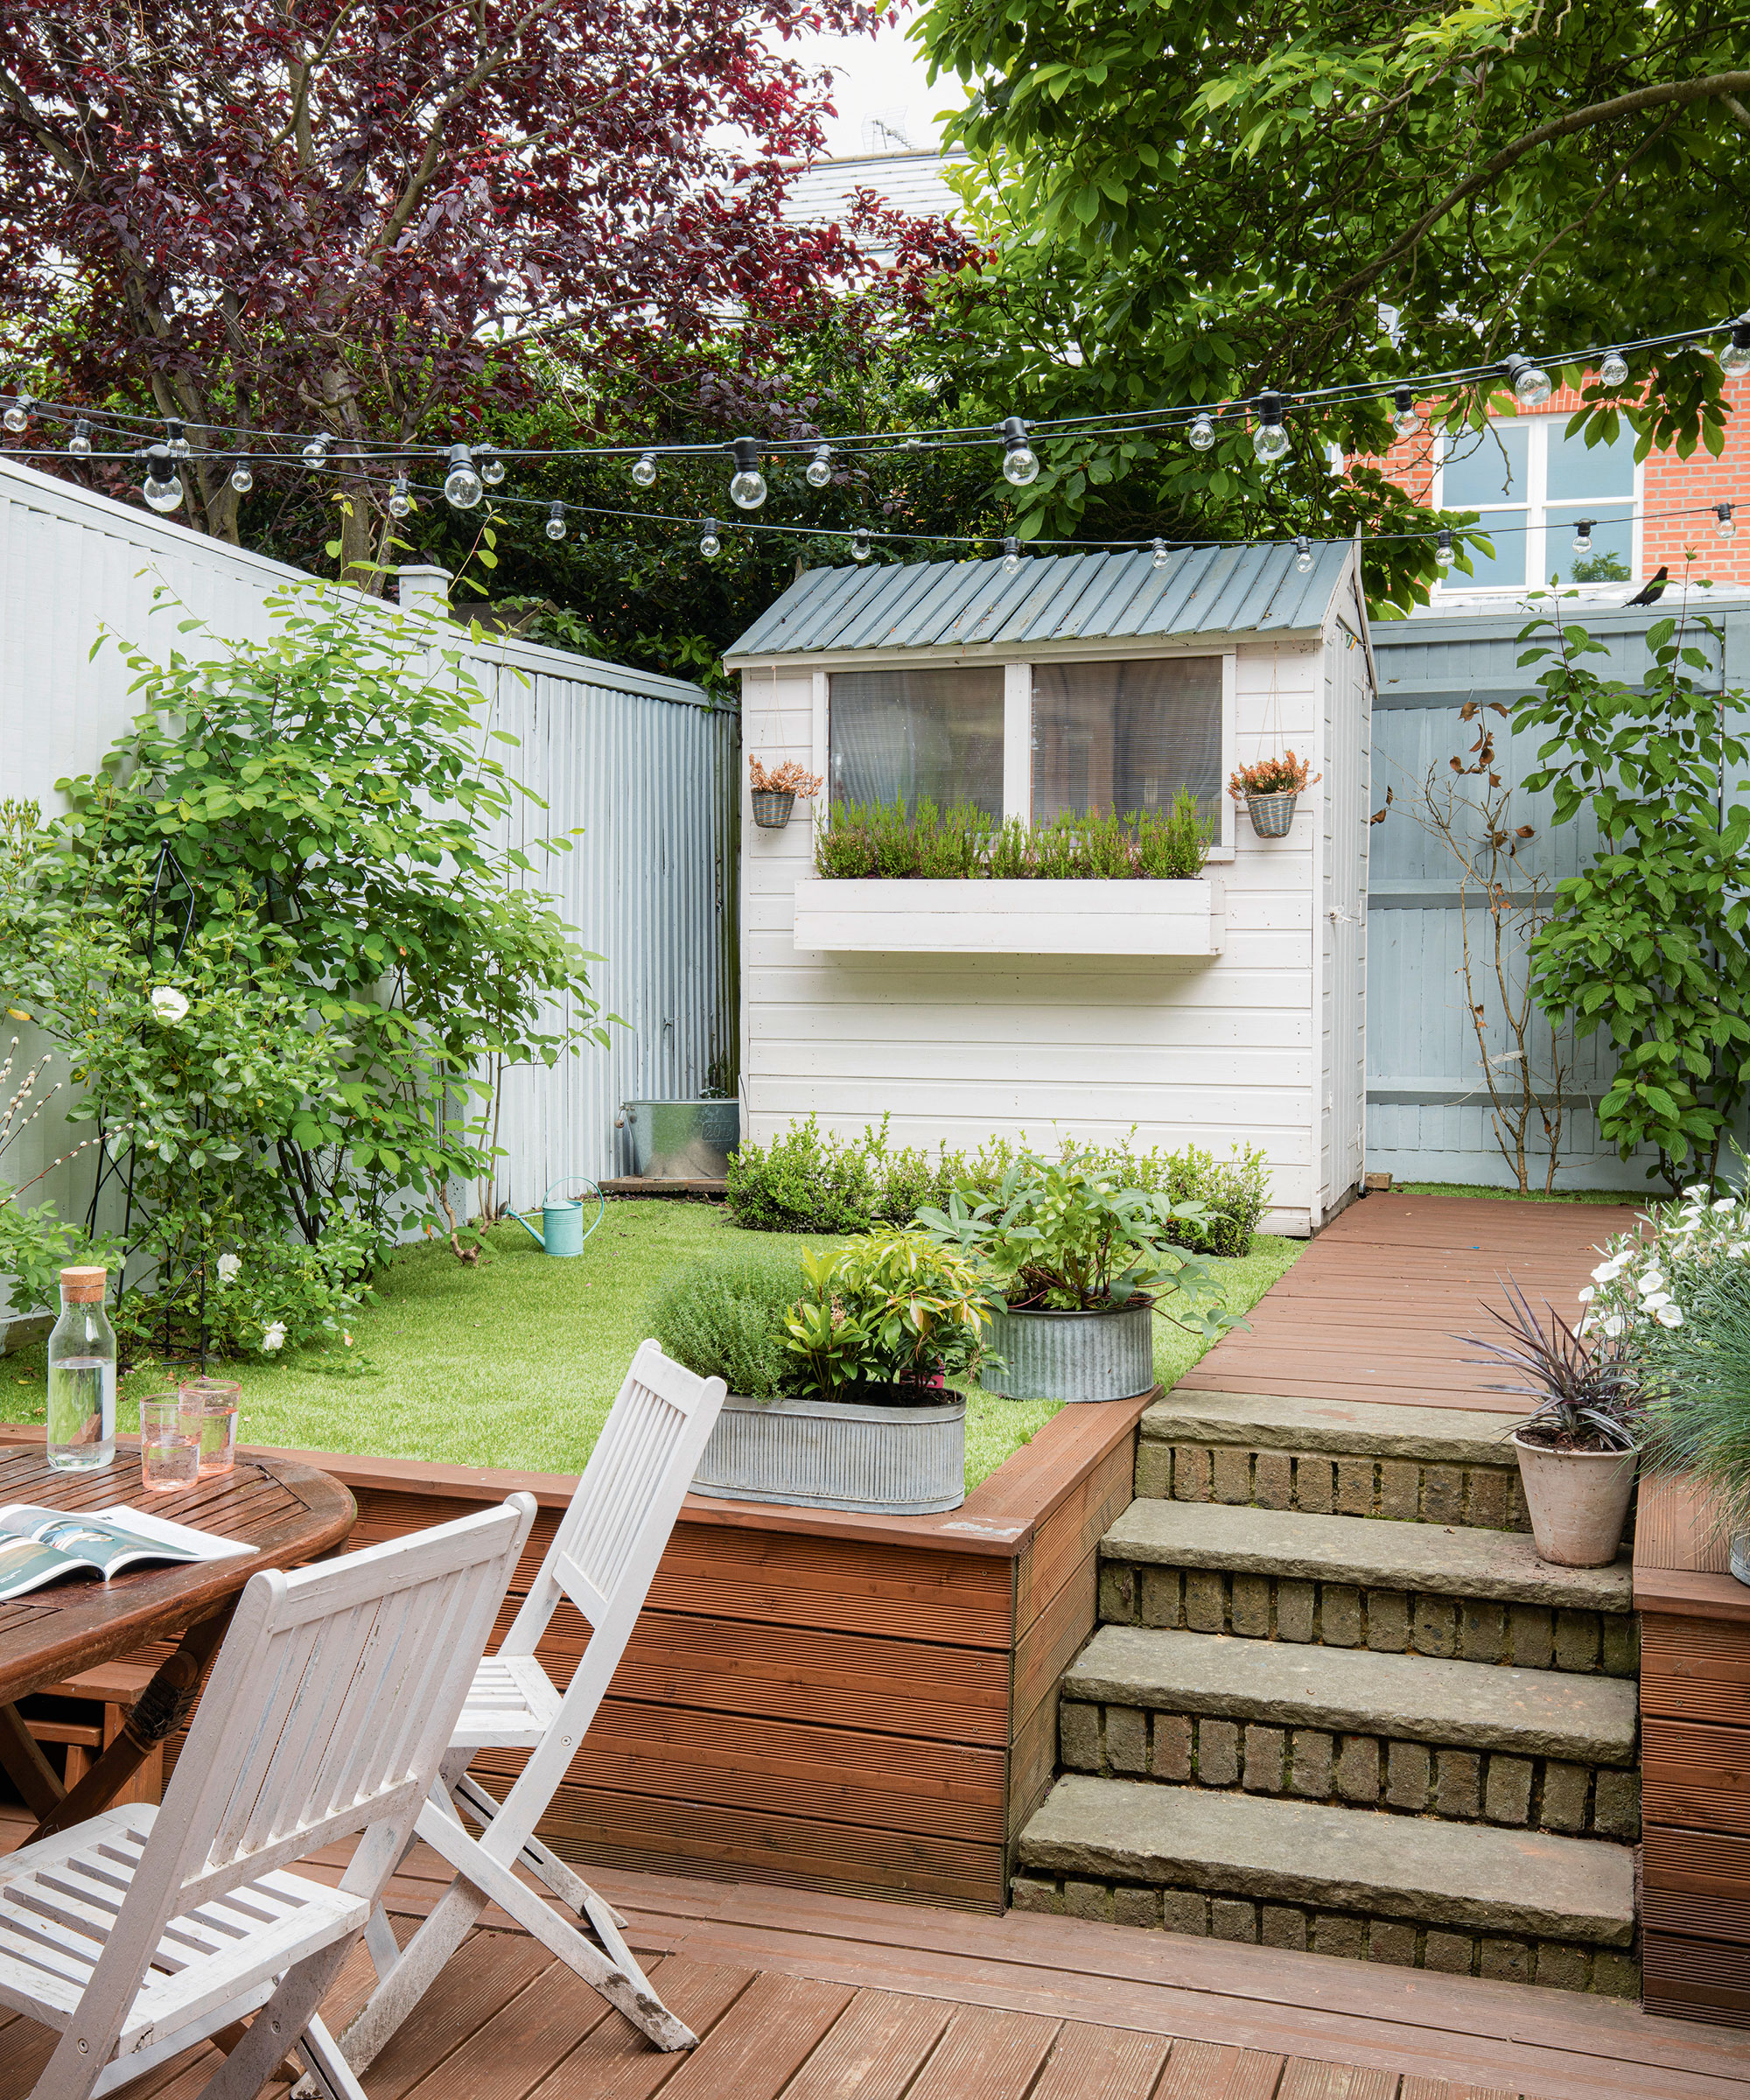 Garden shed ideas – 20 inspiring looks for your own outdoor room ...